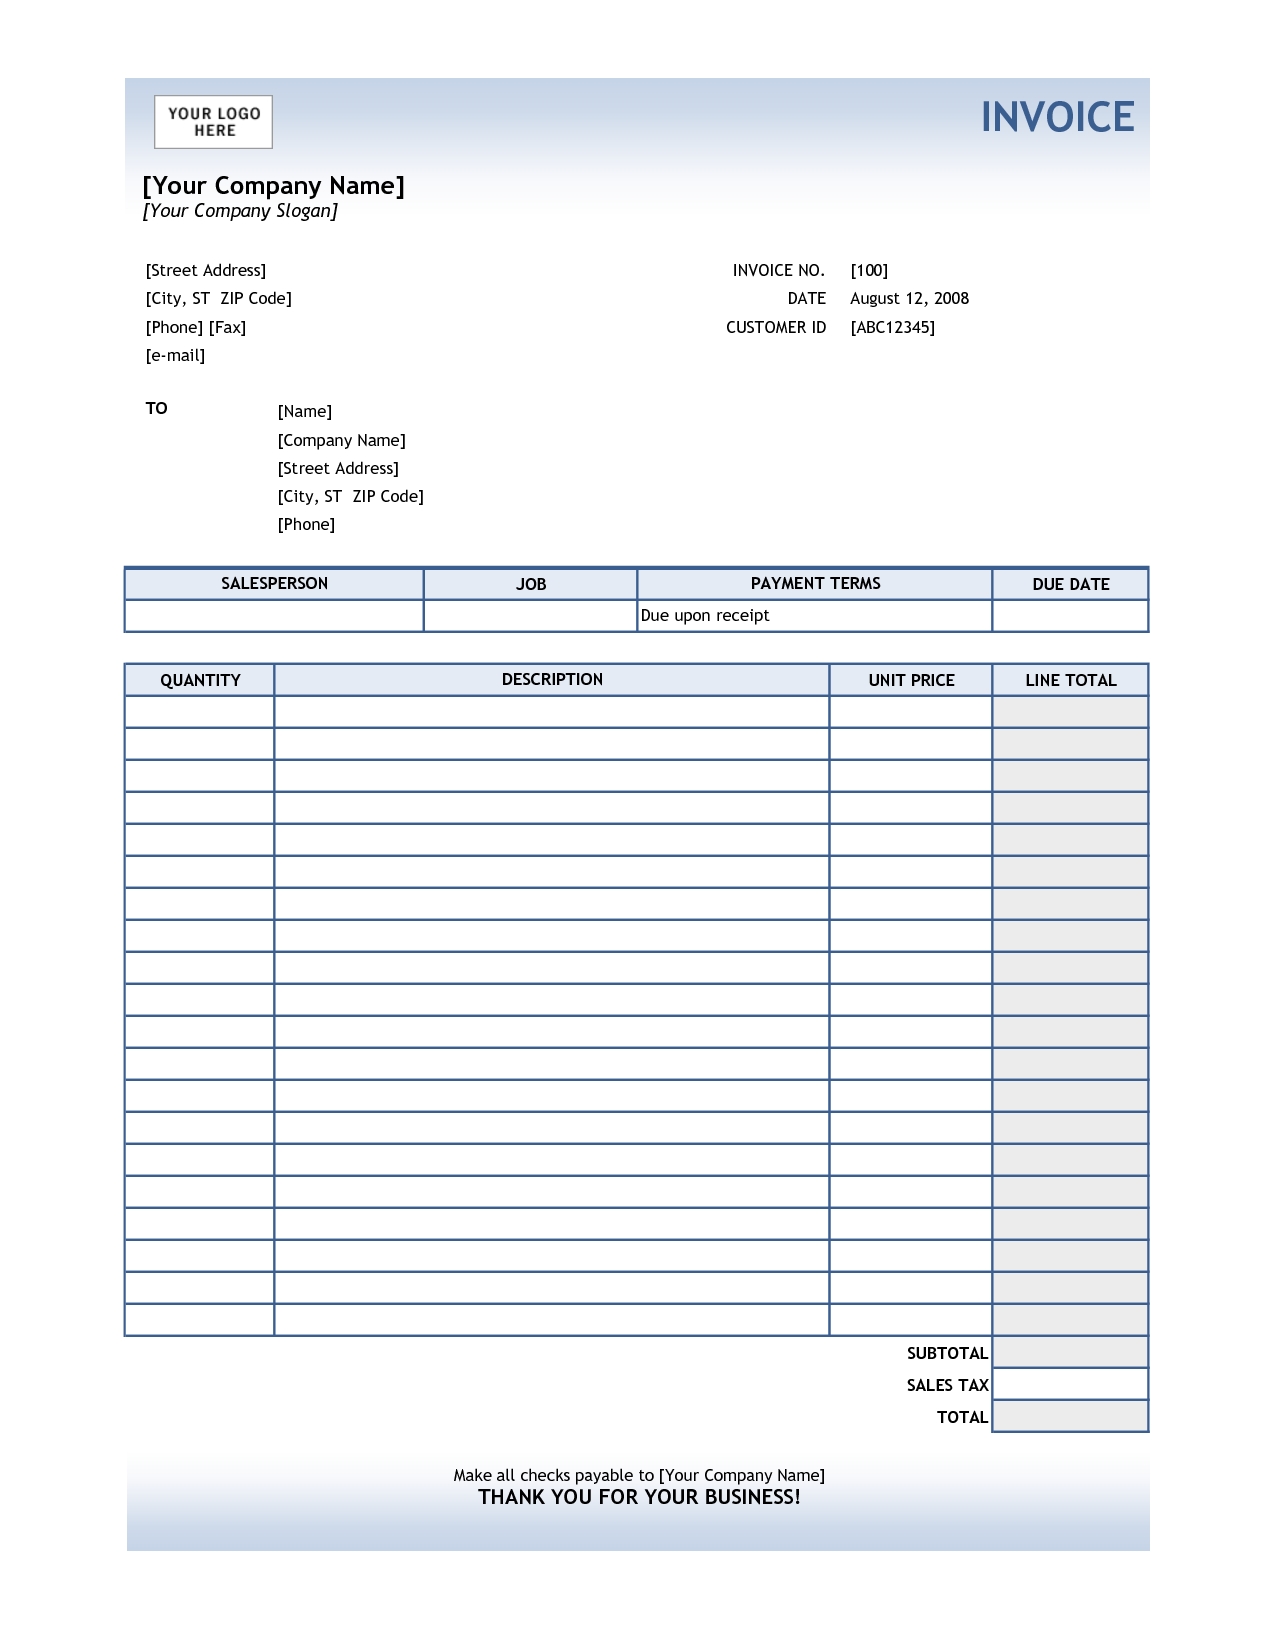 excel invoice sample 12 best photos of excel invoice template downloadable invoice 1275 X 1650